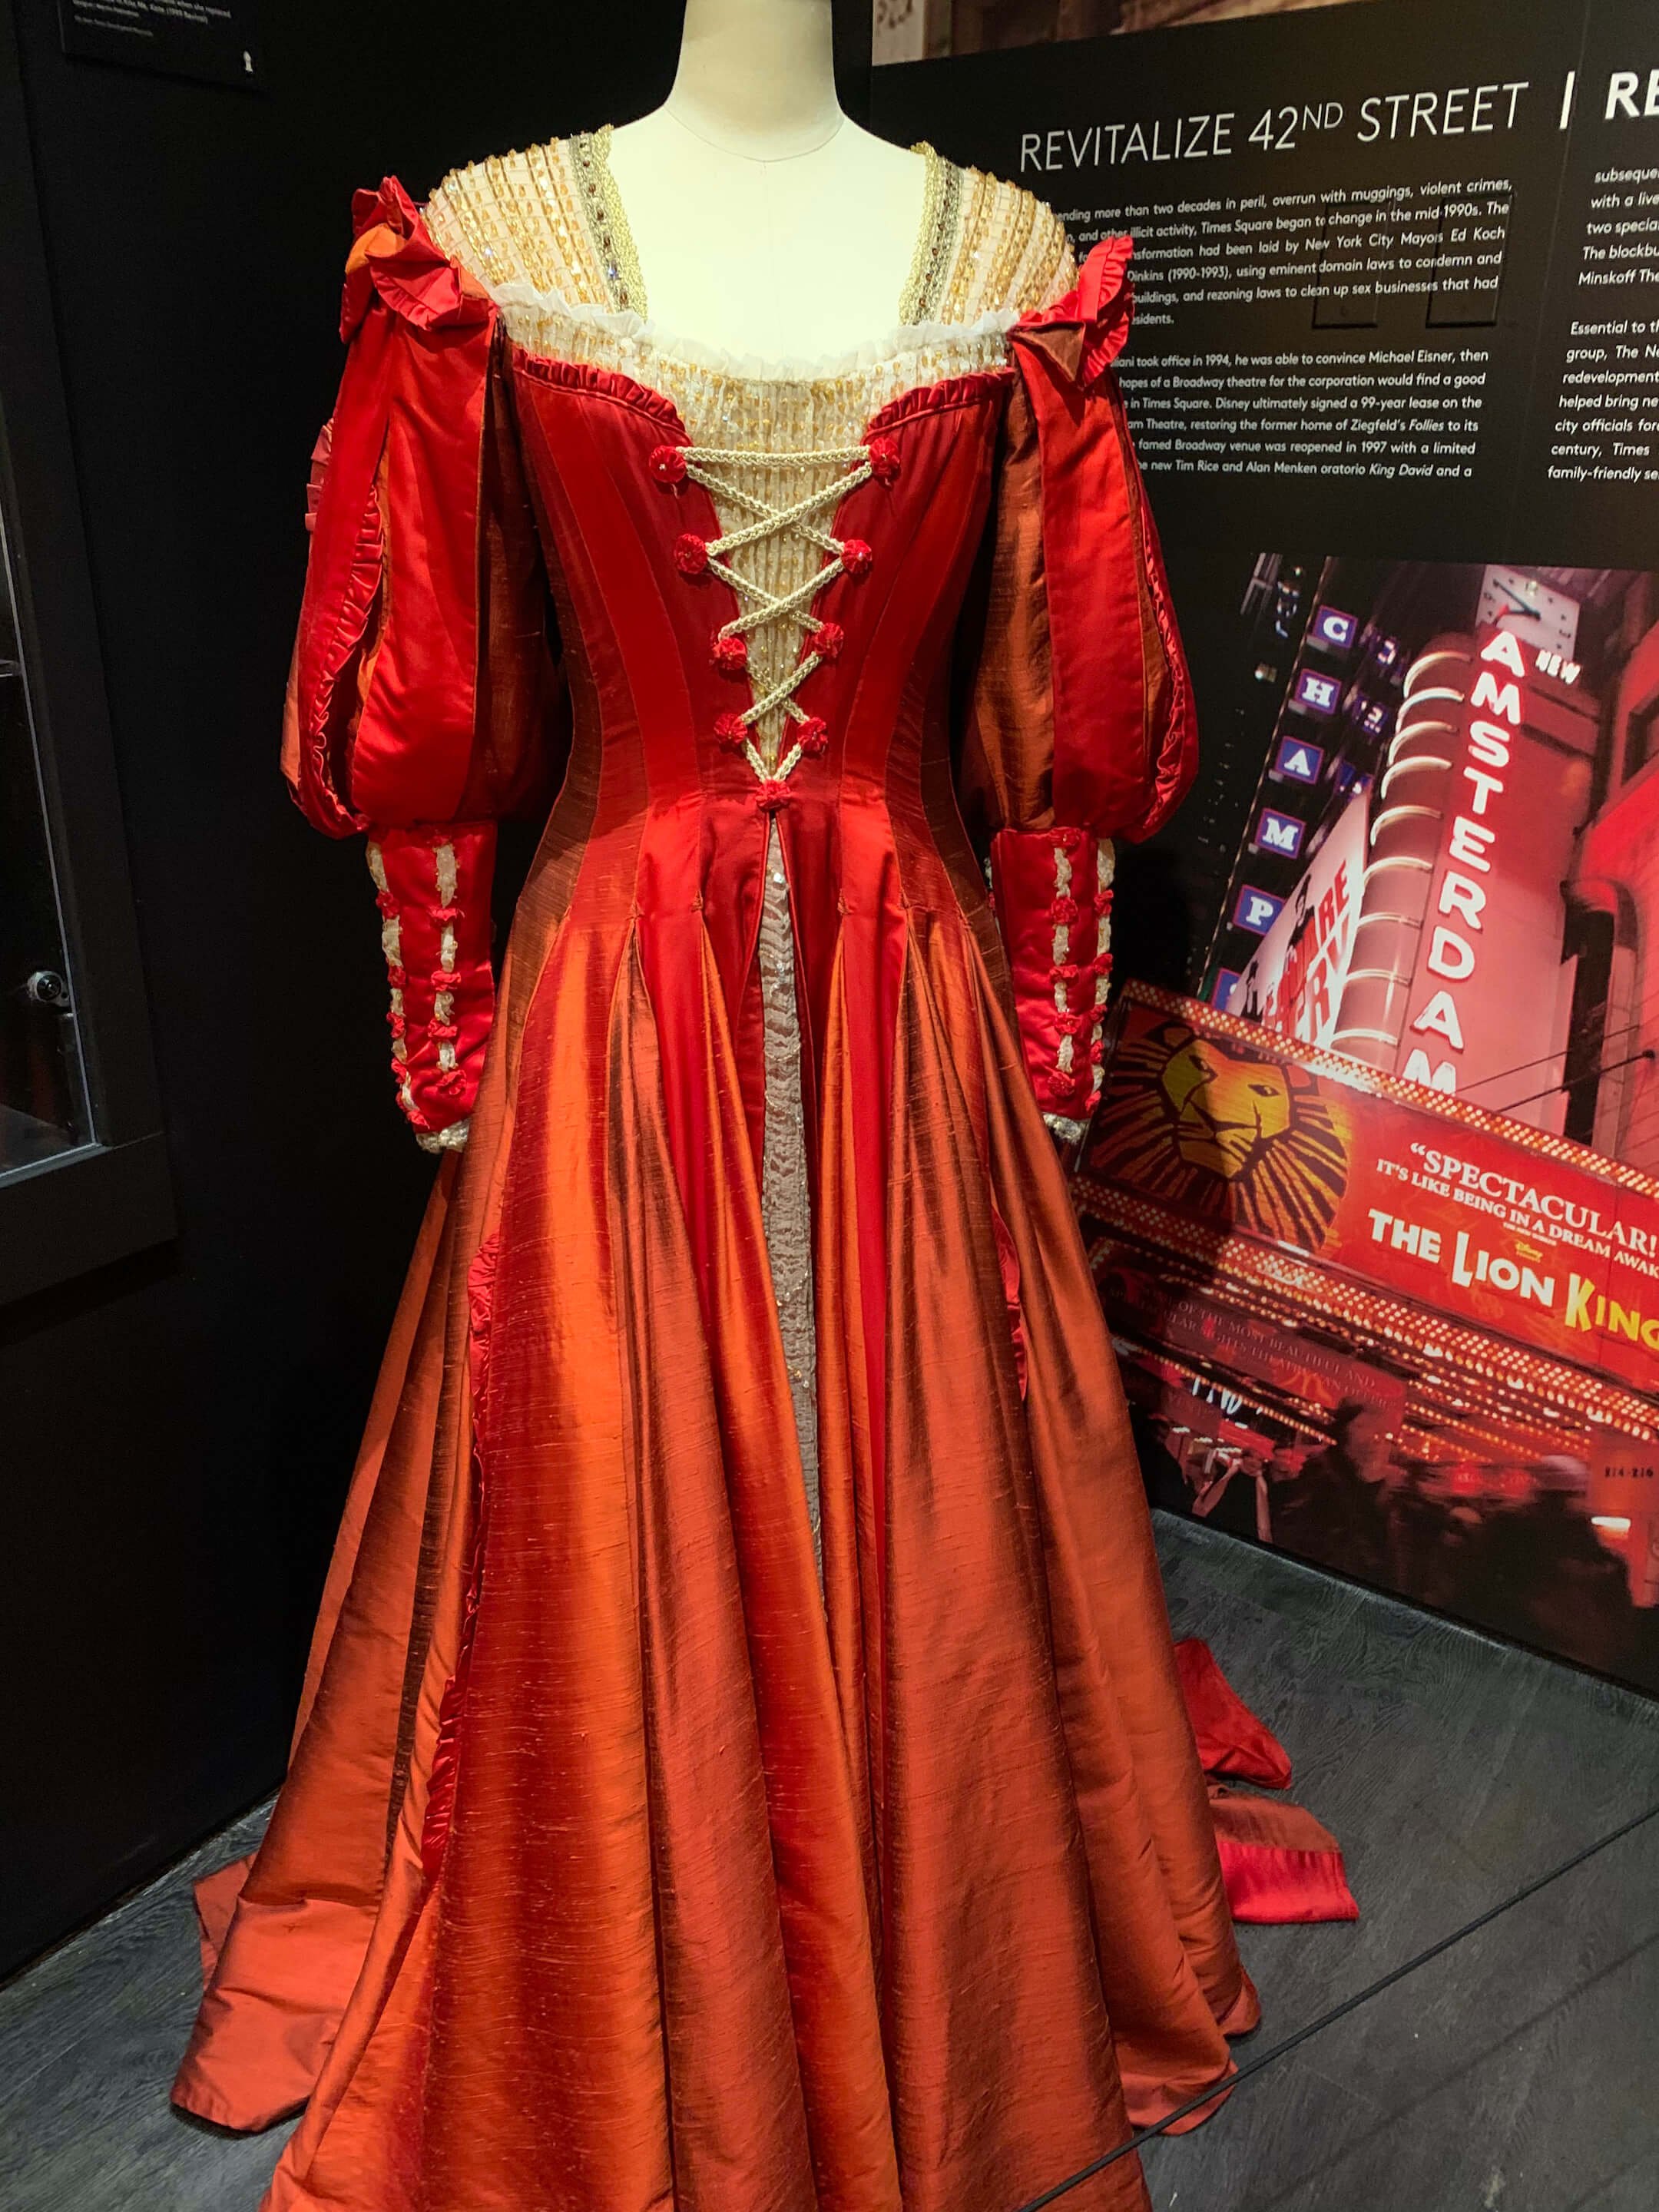  Dress from the revival of  Kiss Me, Kate  